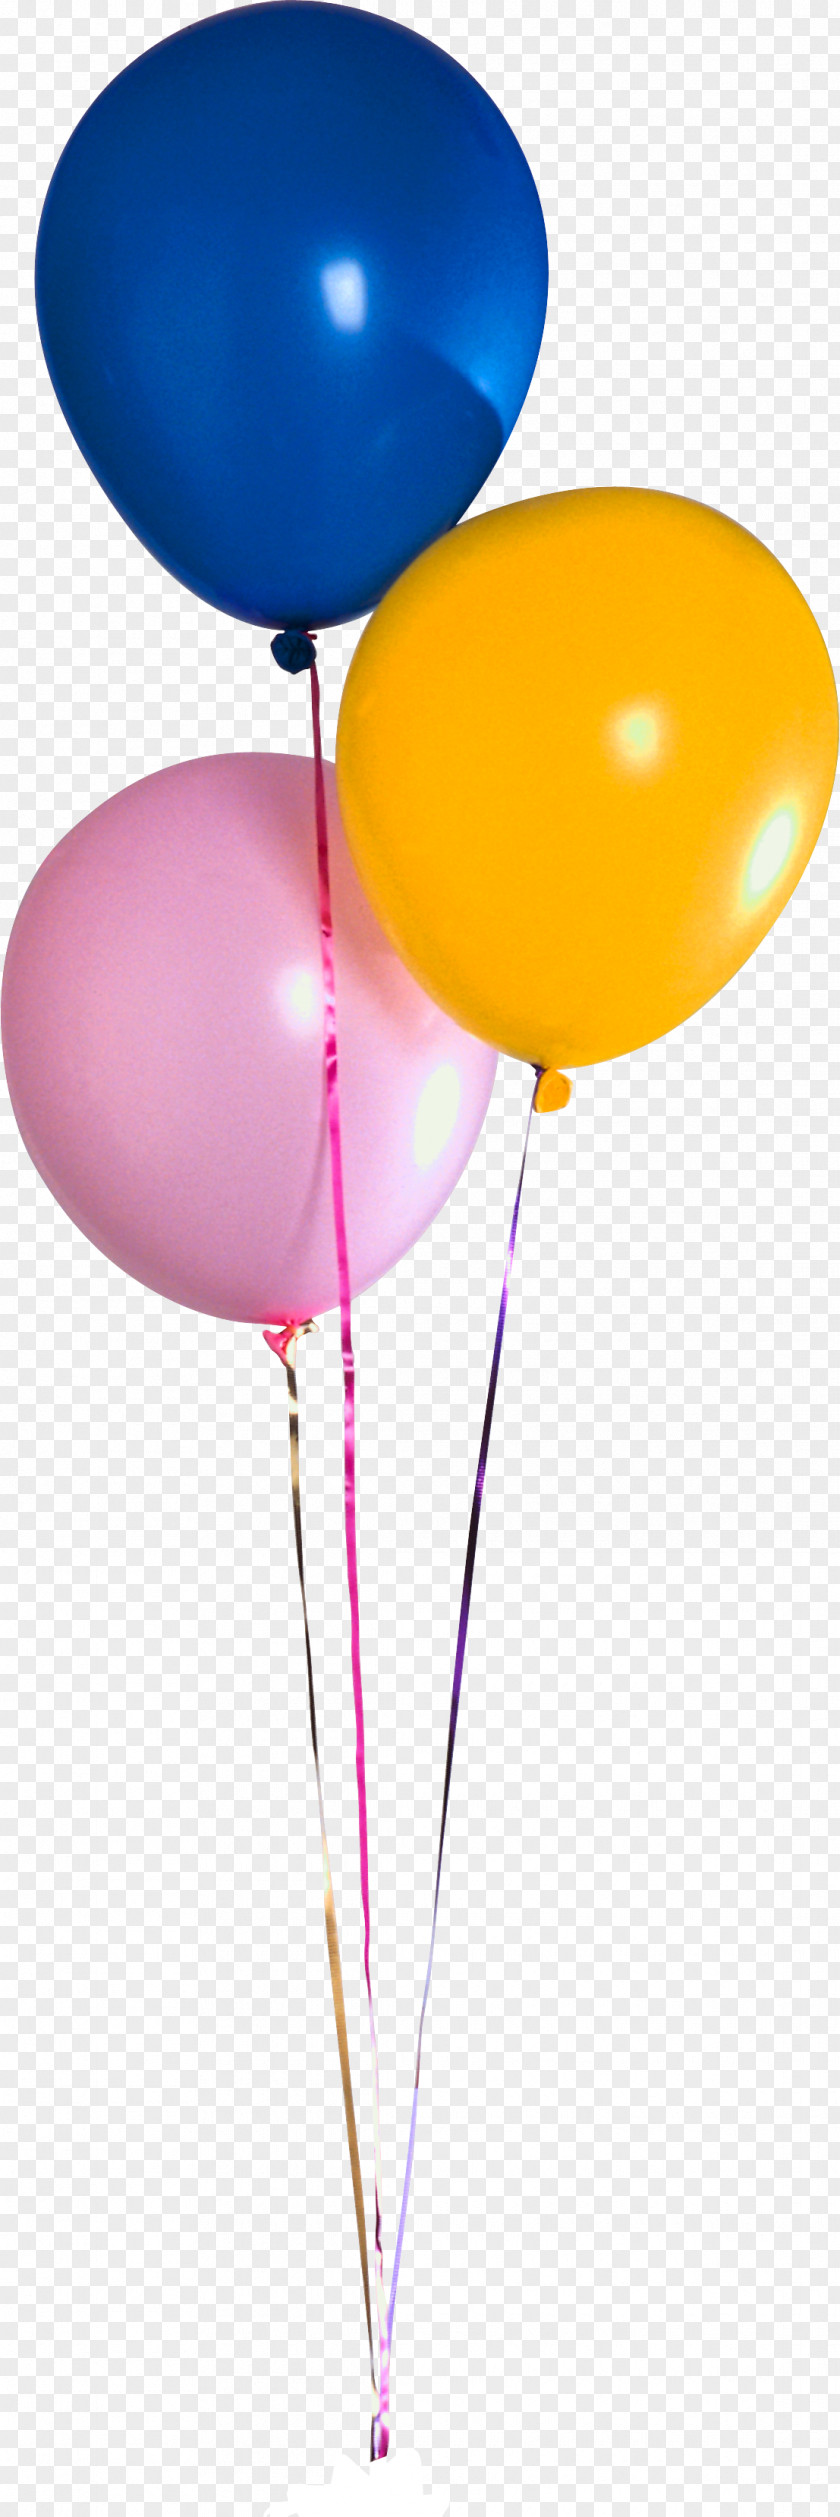 Balon Balloon Birthday Party Hat Stock Photography Gift PNG